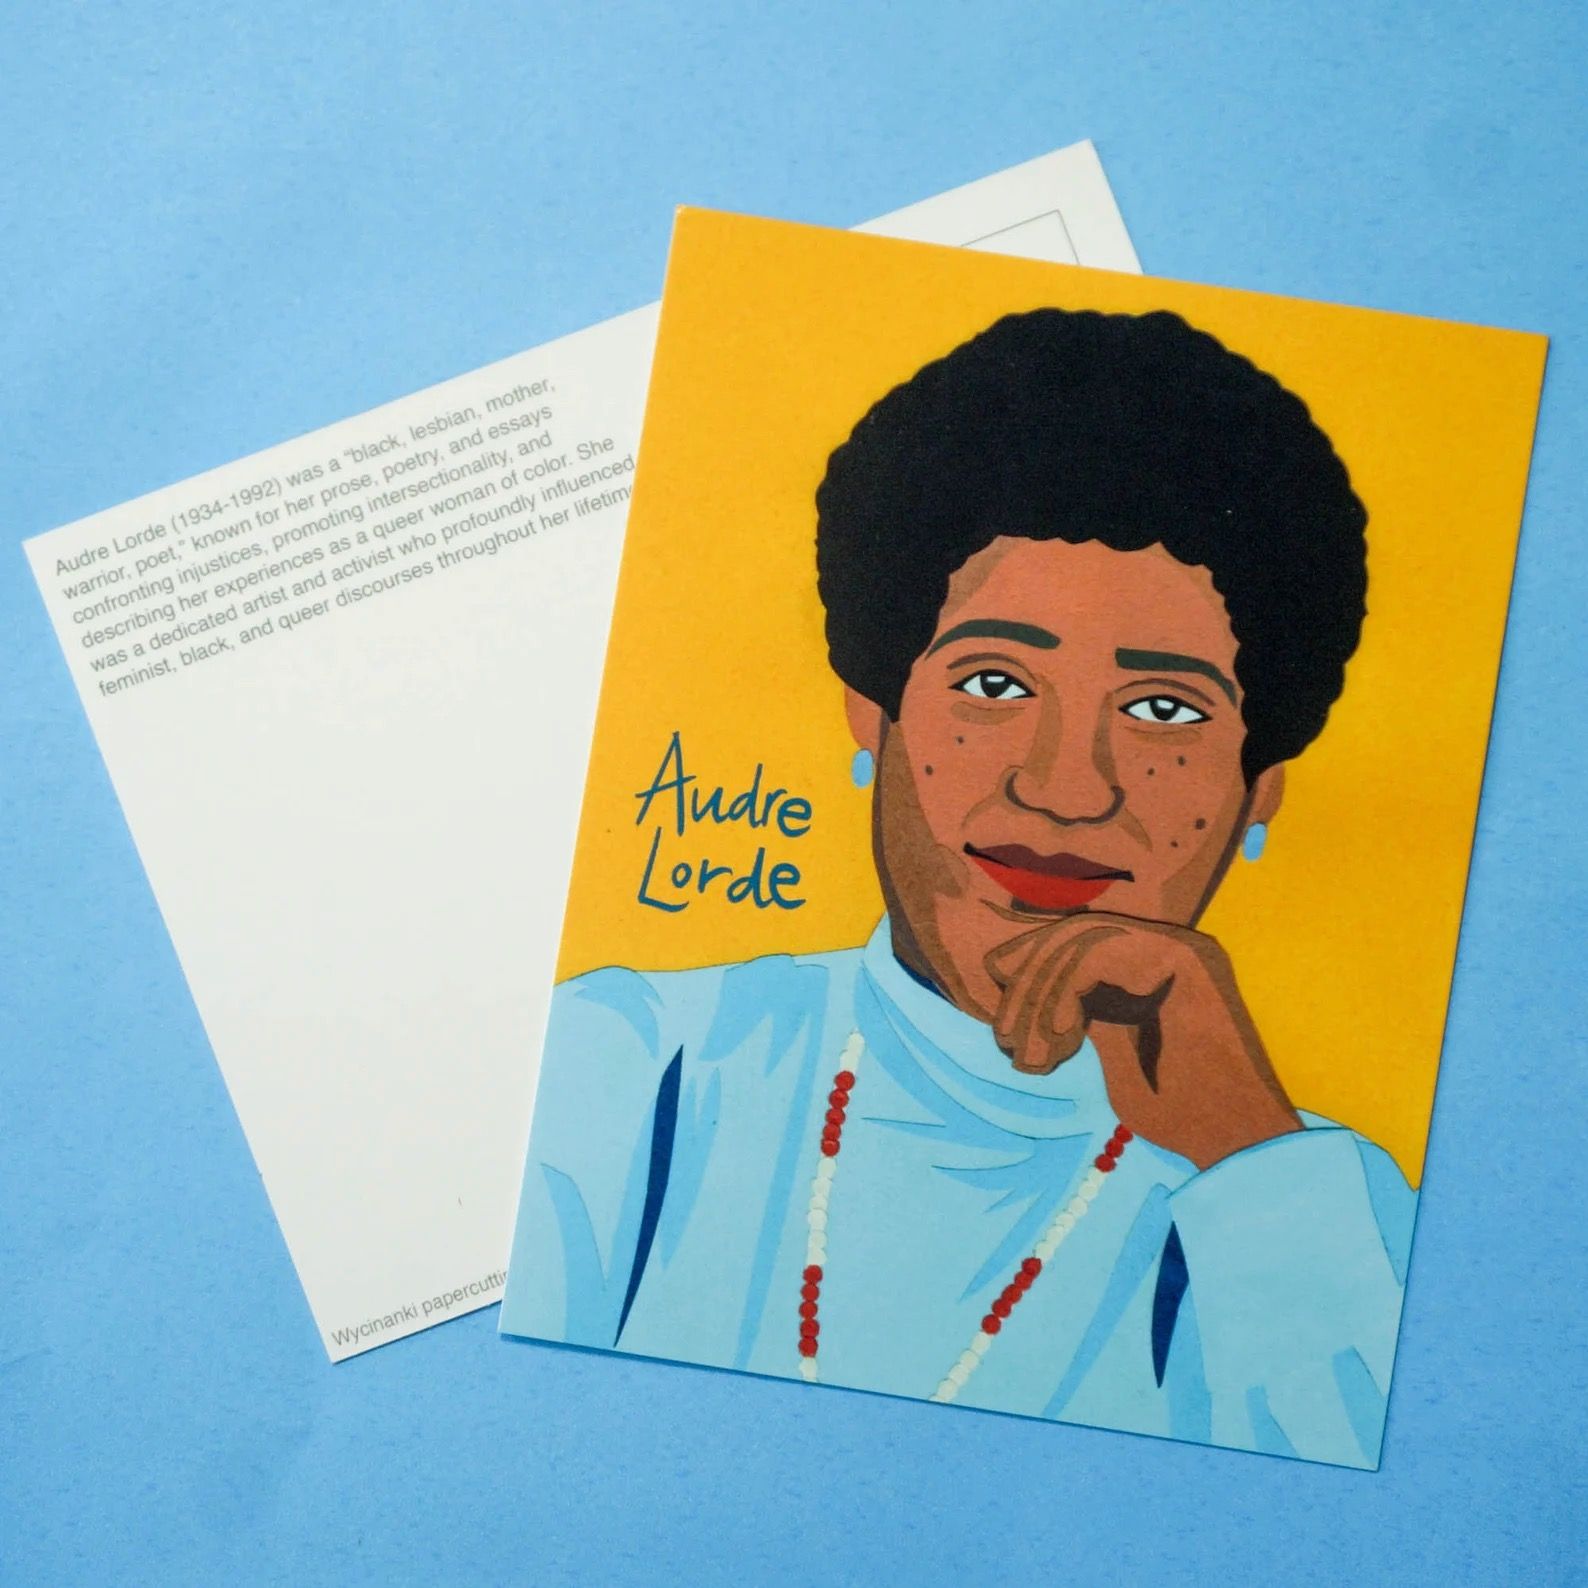 Postcard with a bright painted portrait of Audre Lorde. She has her hand on her chin, and she's wearing a red and white beaded necklace. The background is deep gold.